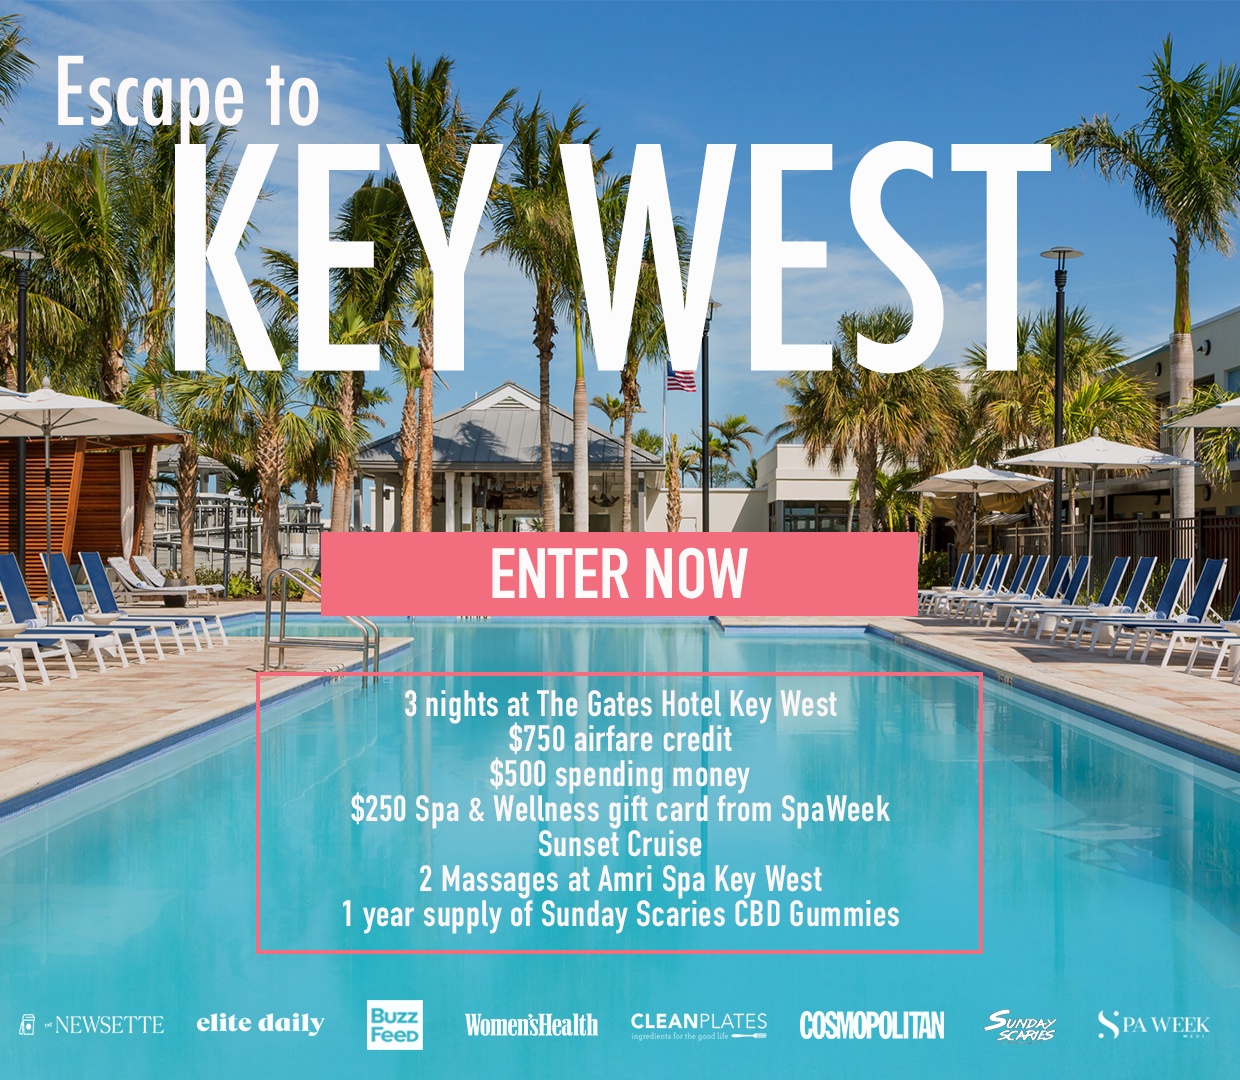 Enter to win a Luxurious Key West Getaway!